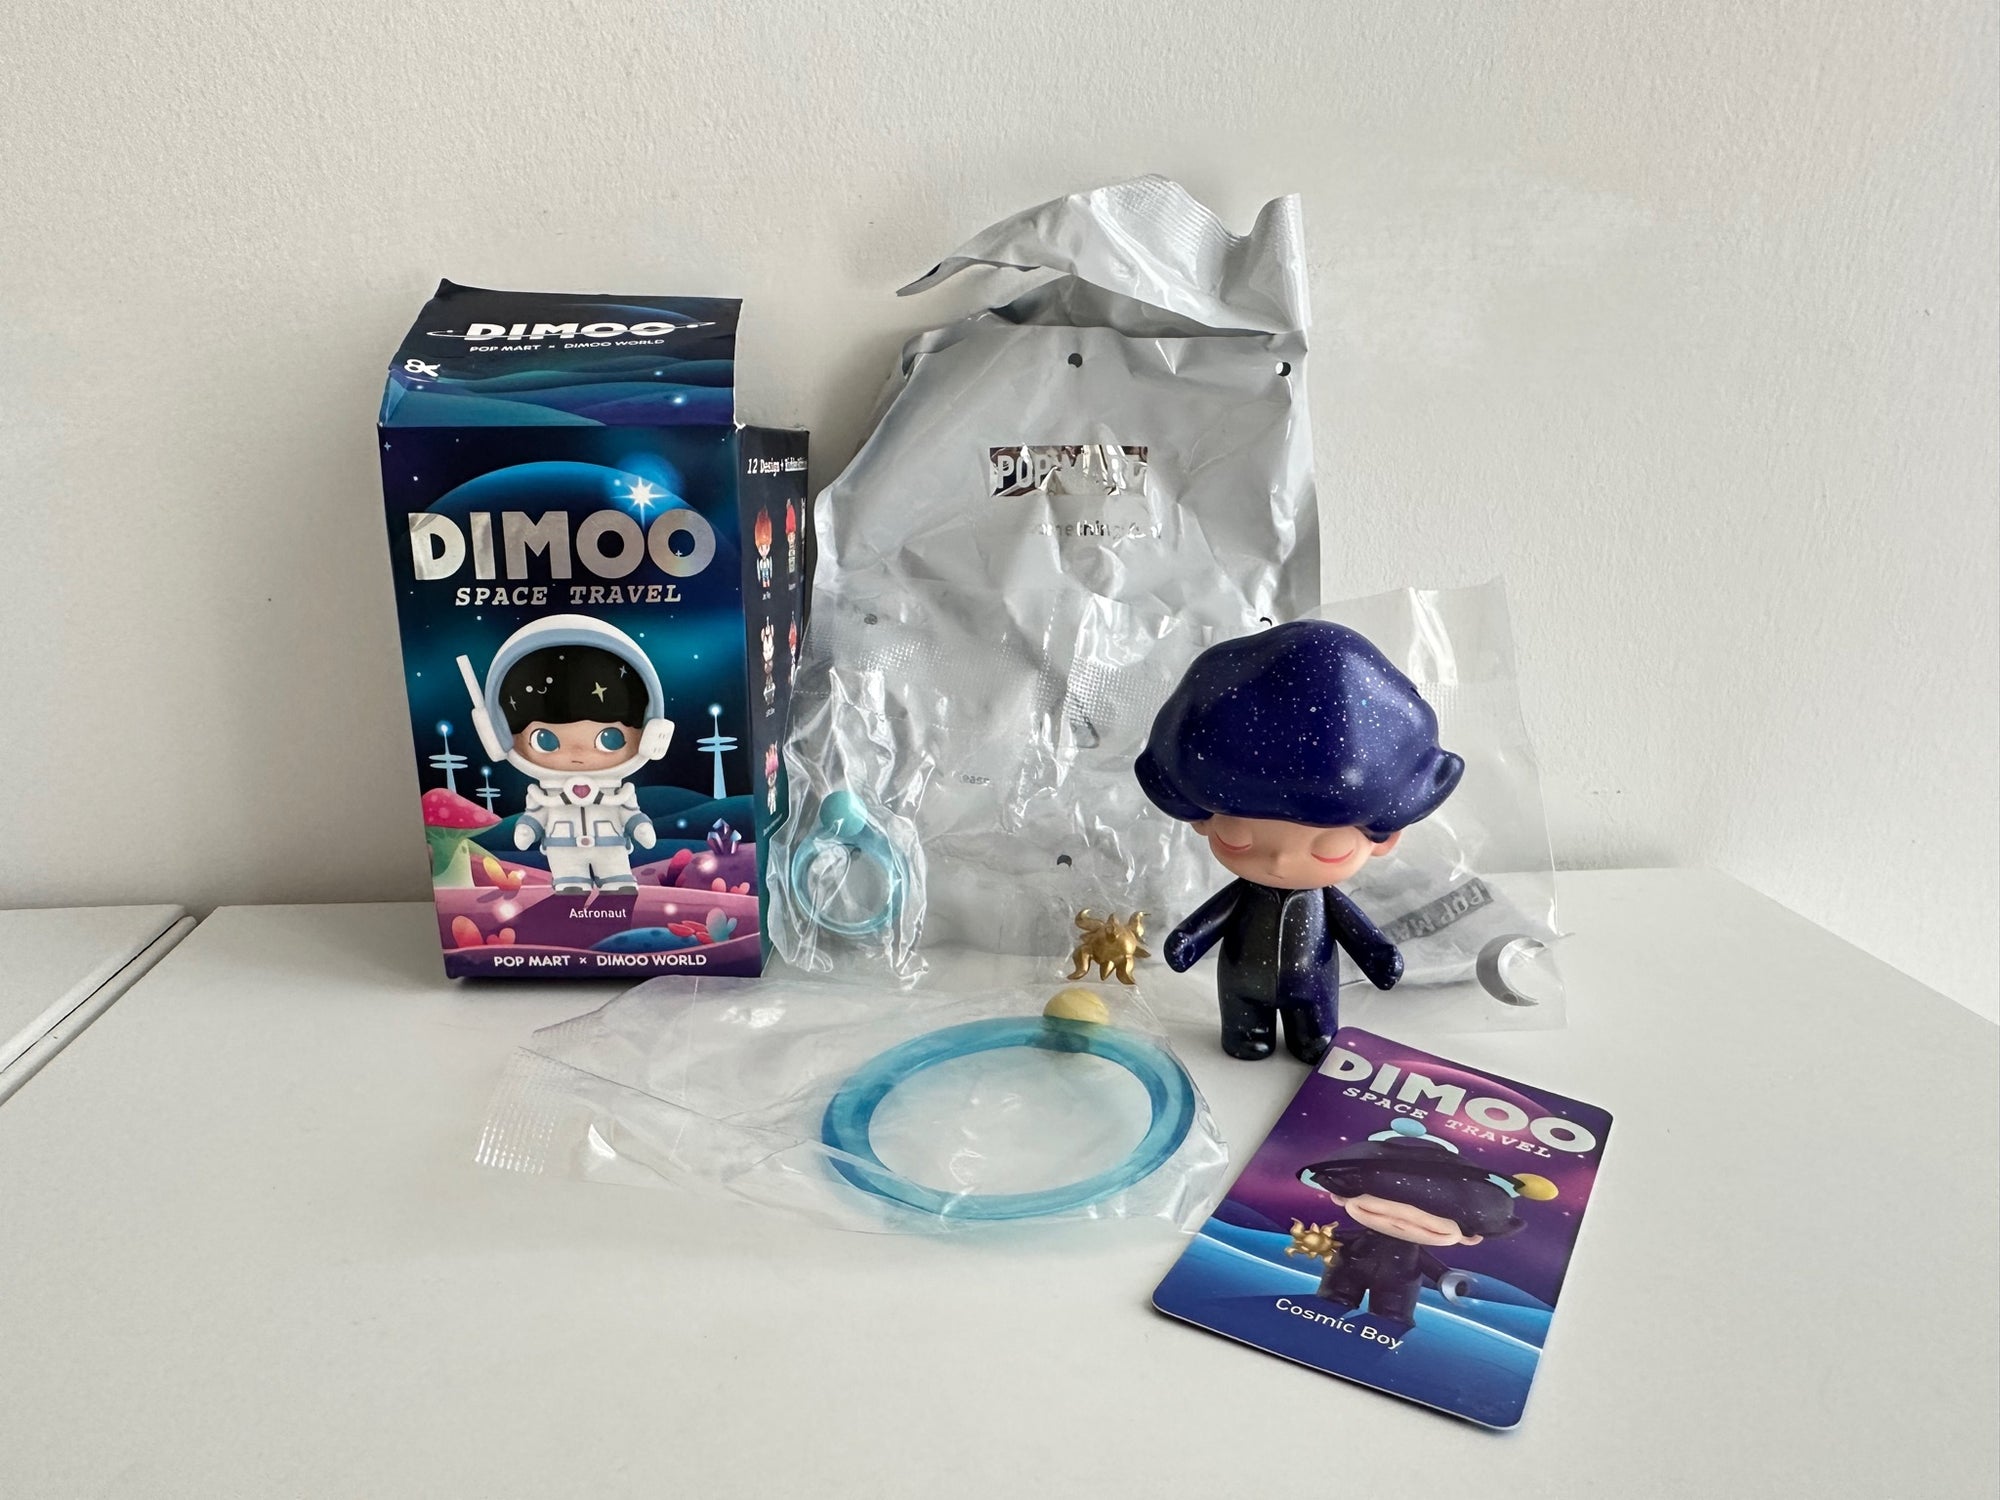 Cosmic Boy (Secret/Chaser) - Dimoo Space Travel by POP MART - 1